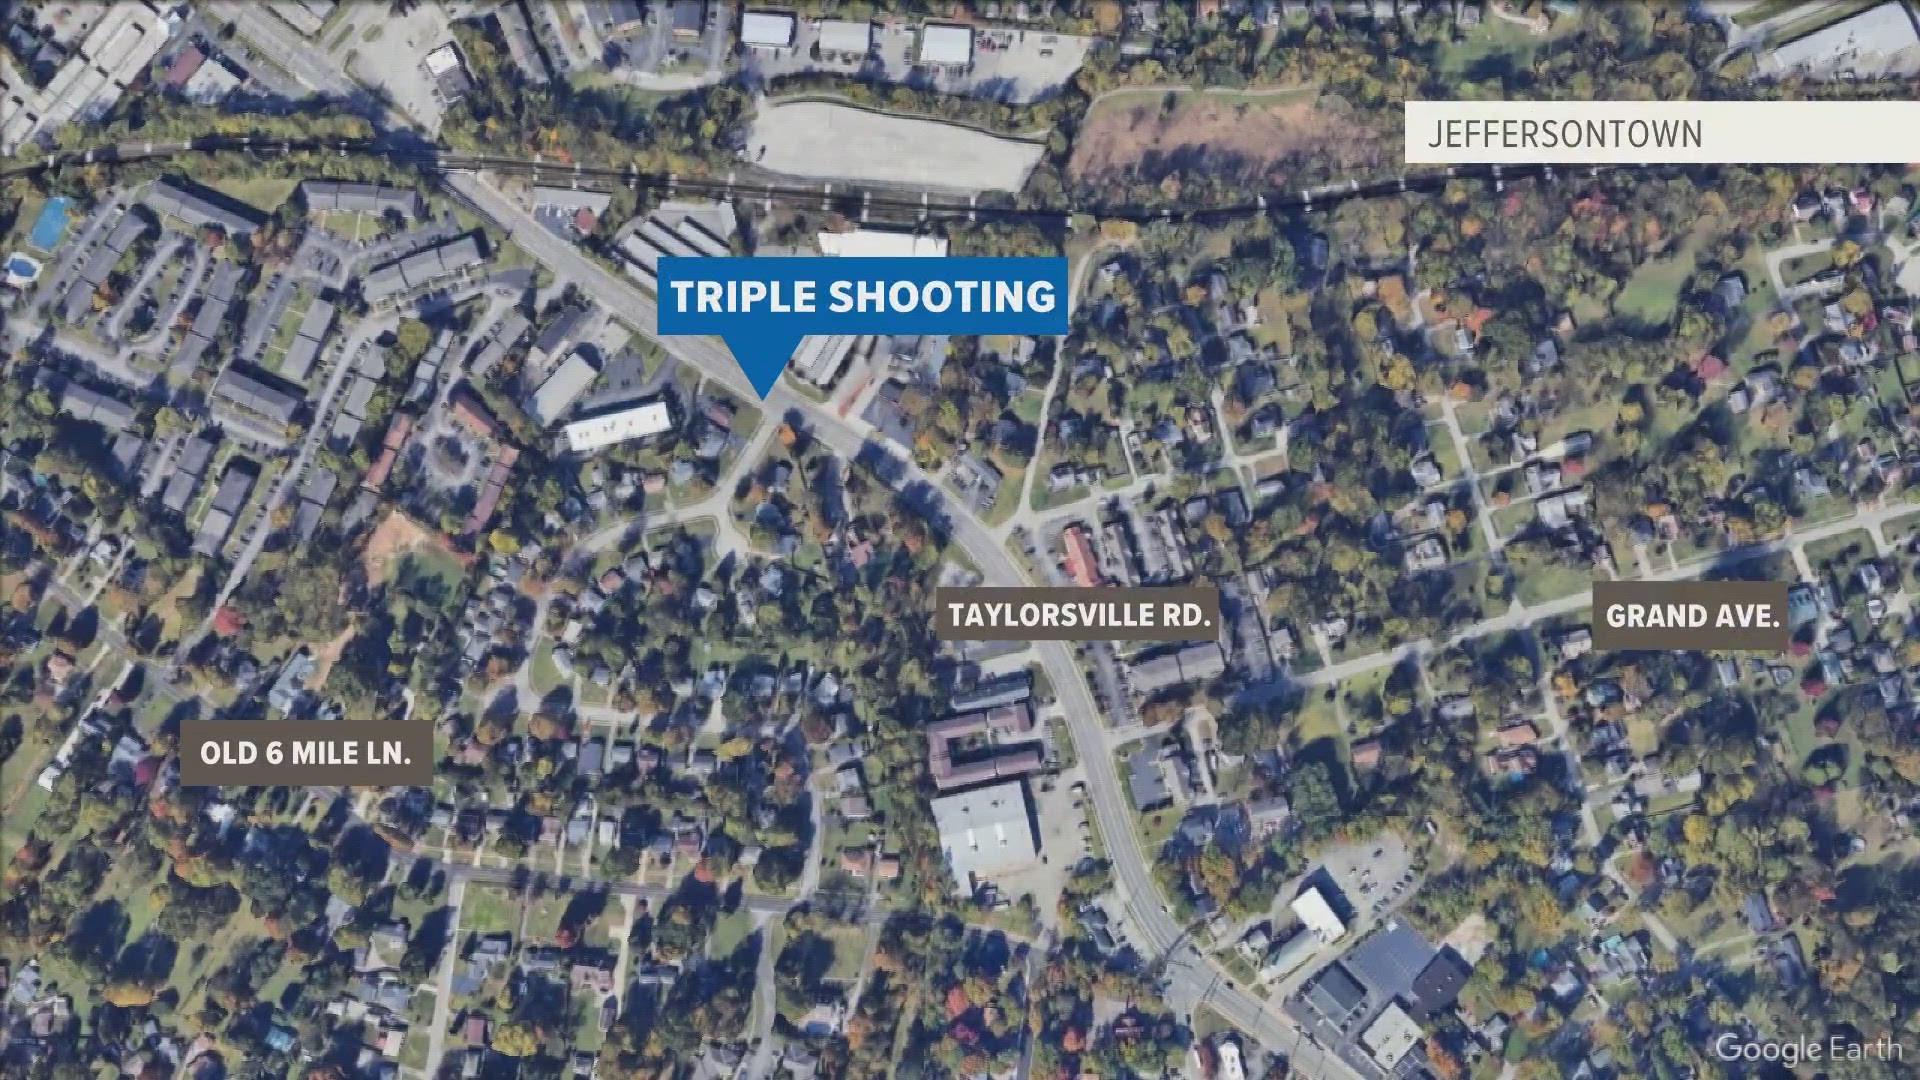 Police said the shooting stemmed from an argument following a gathering at an apartment.